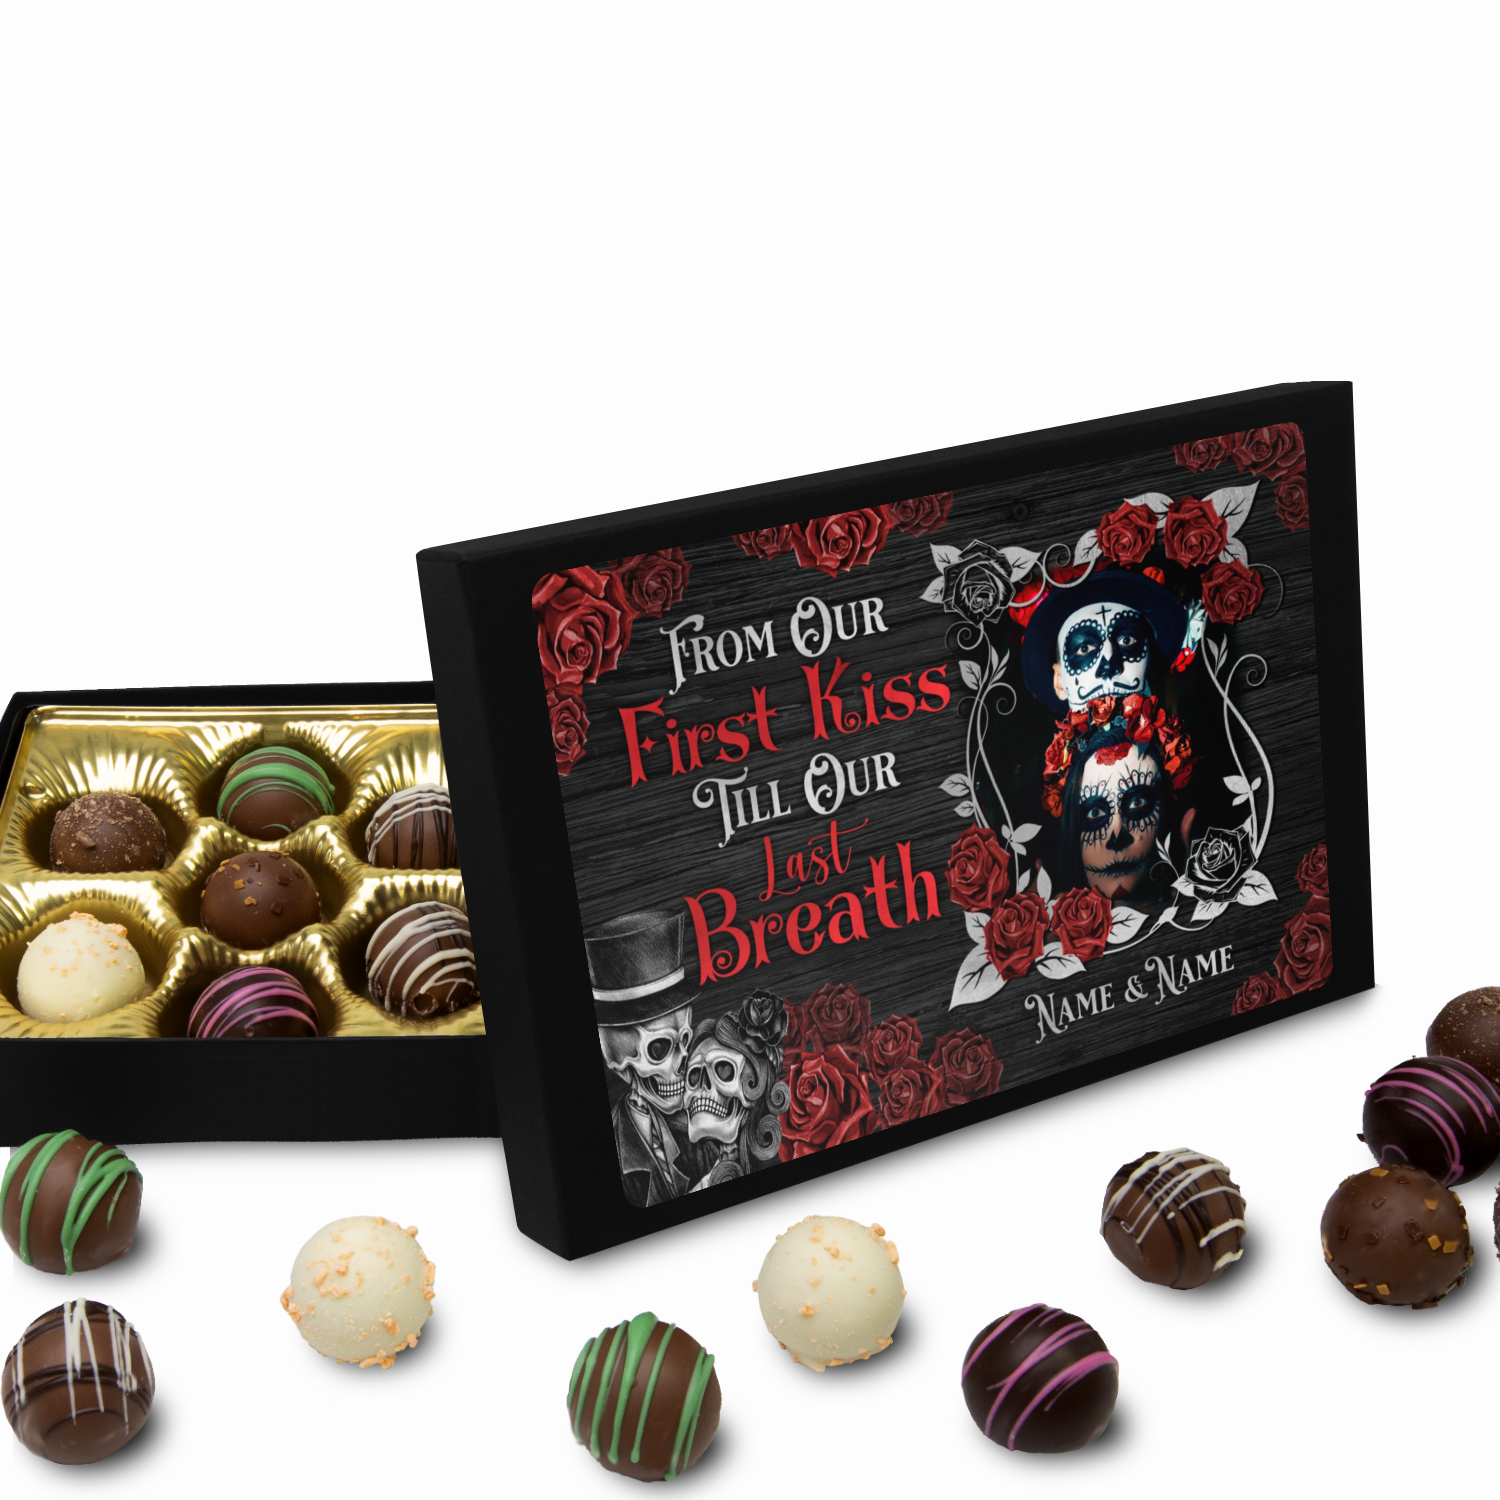 FROM OUR FIRST KISS CHOCOLATE BOX - TLNO0301232